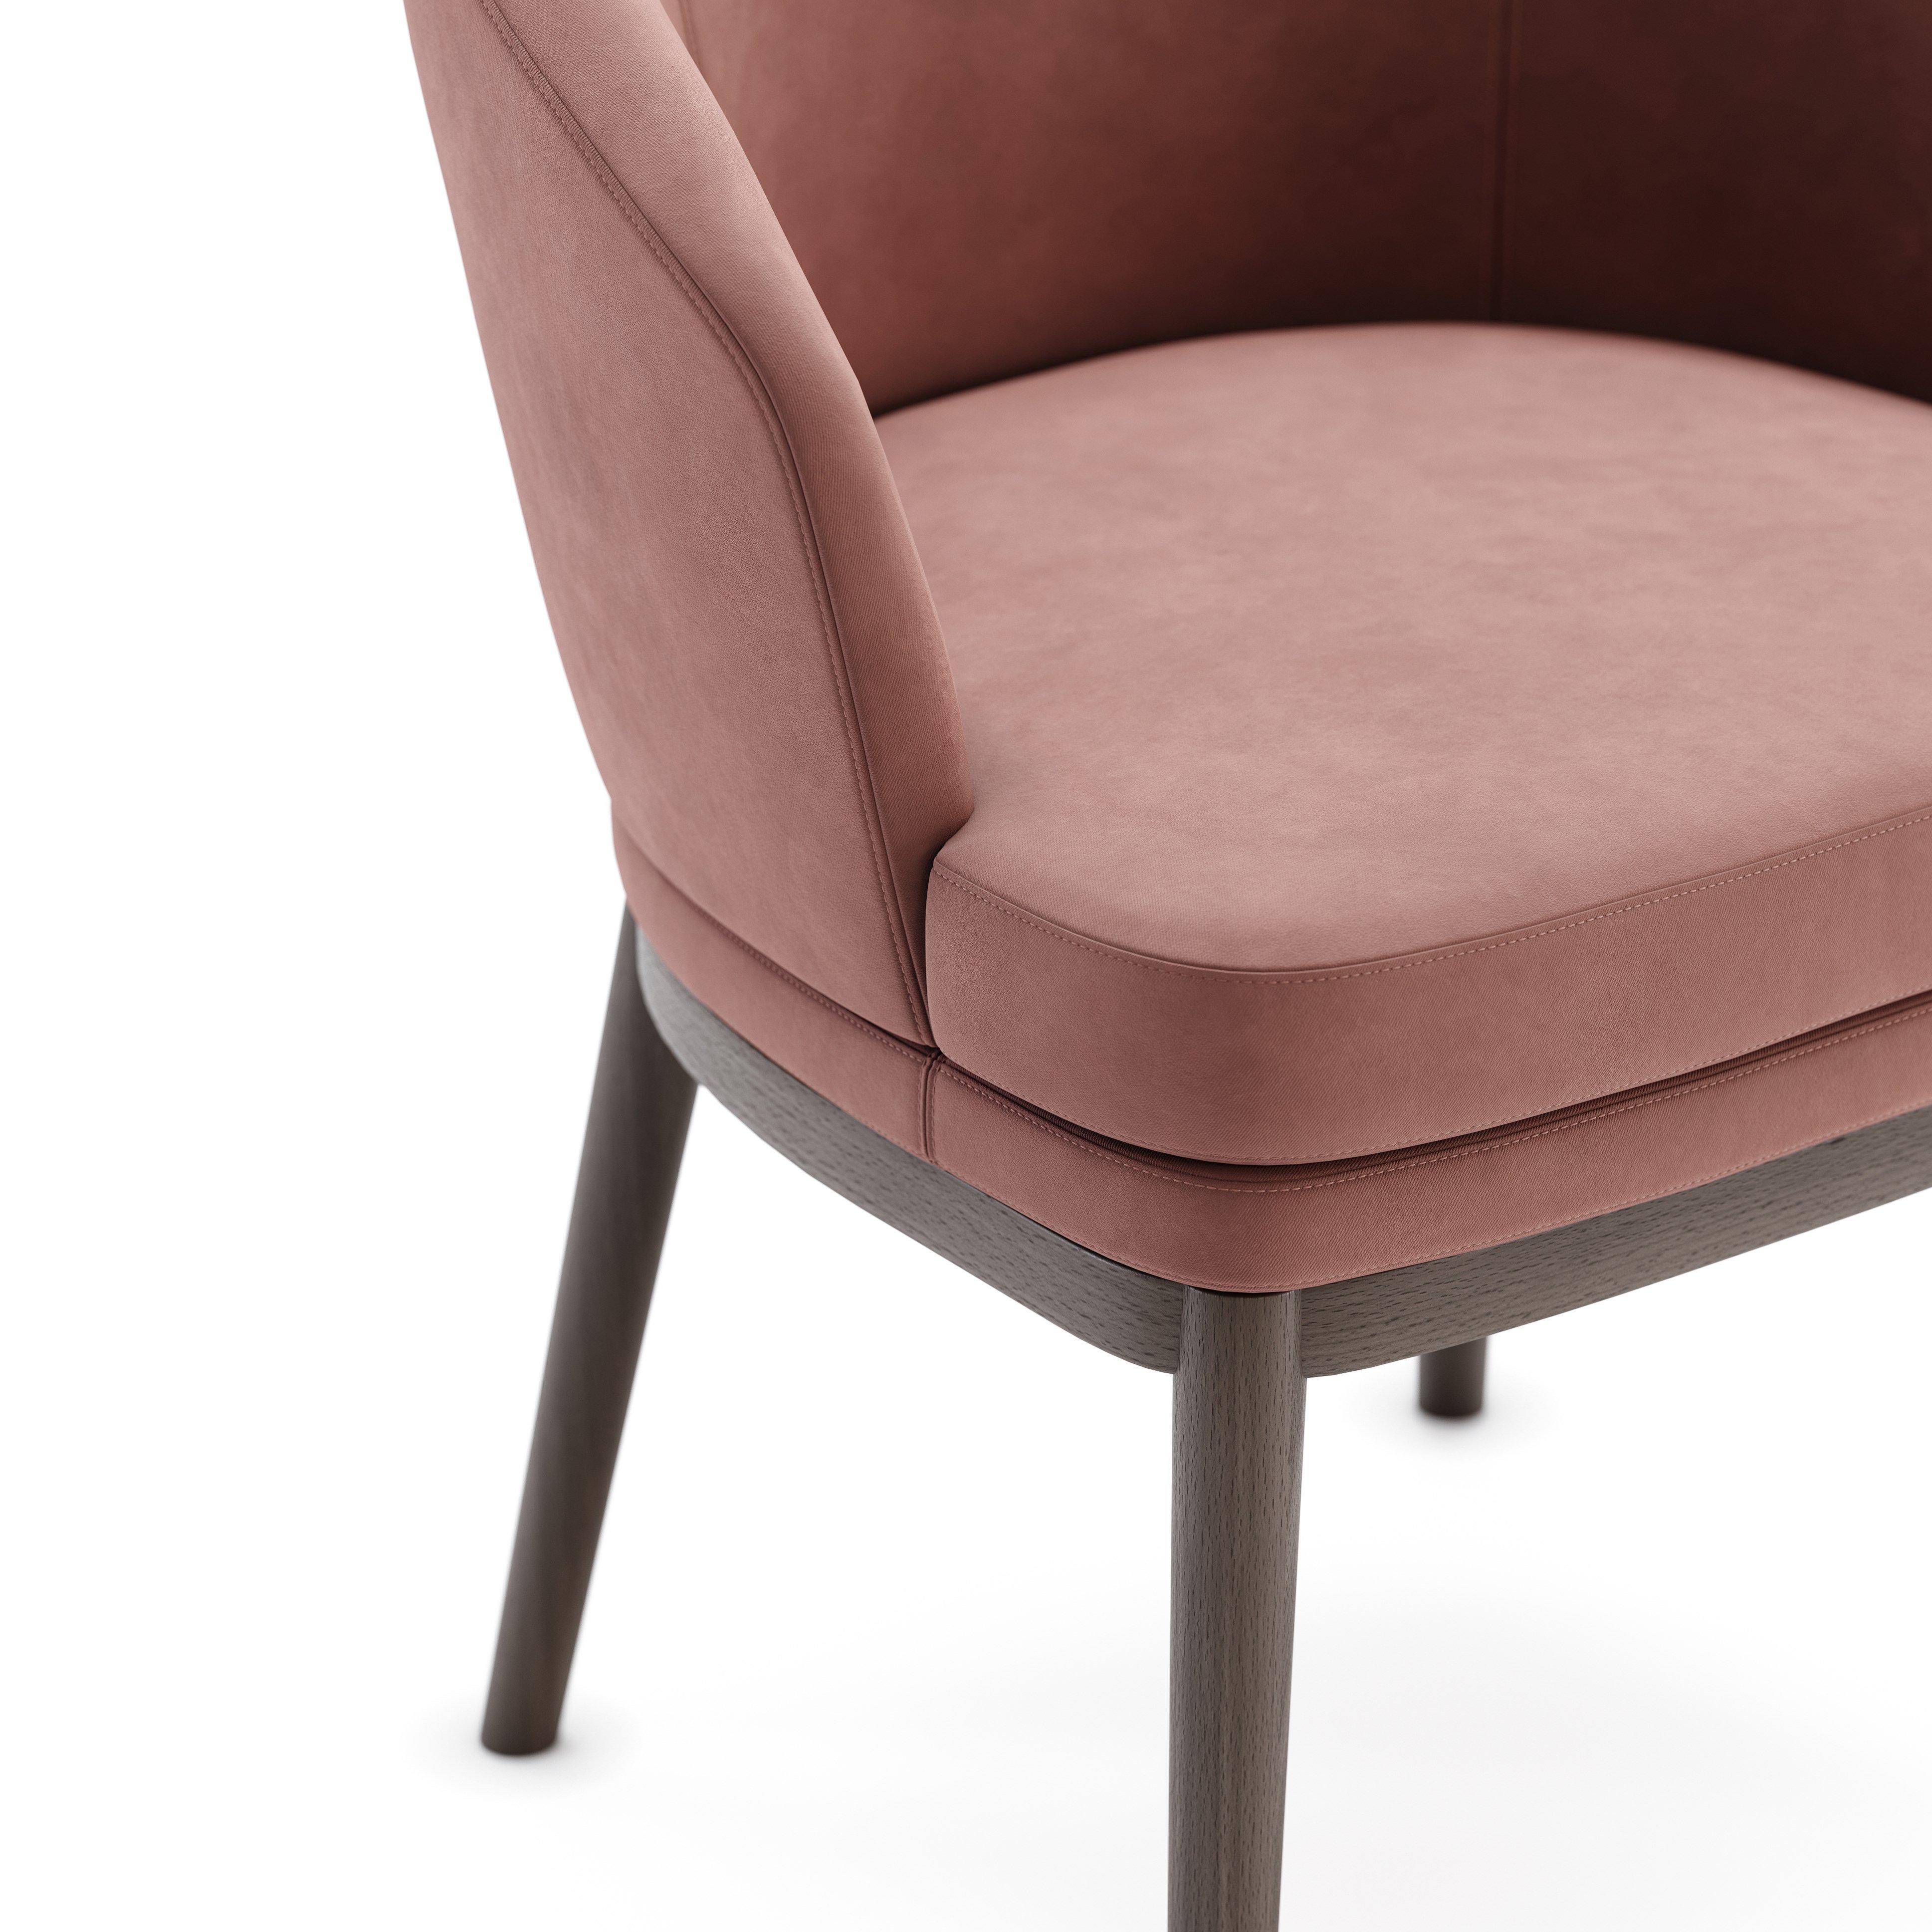 Modern 8 Contemporary Dining Chairs Offered in Rose Velvet